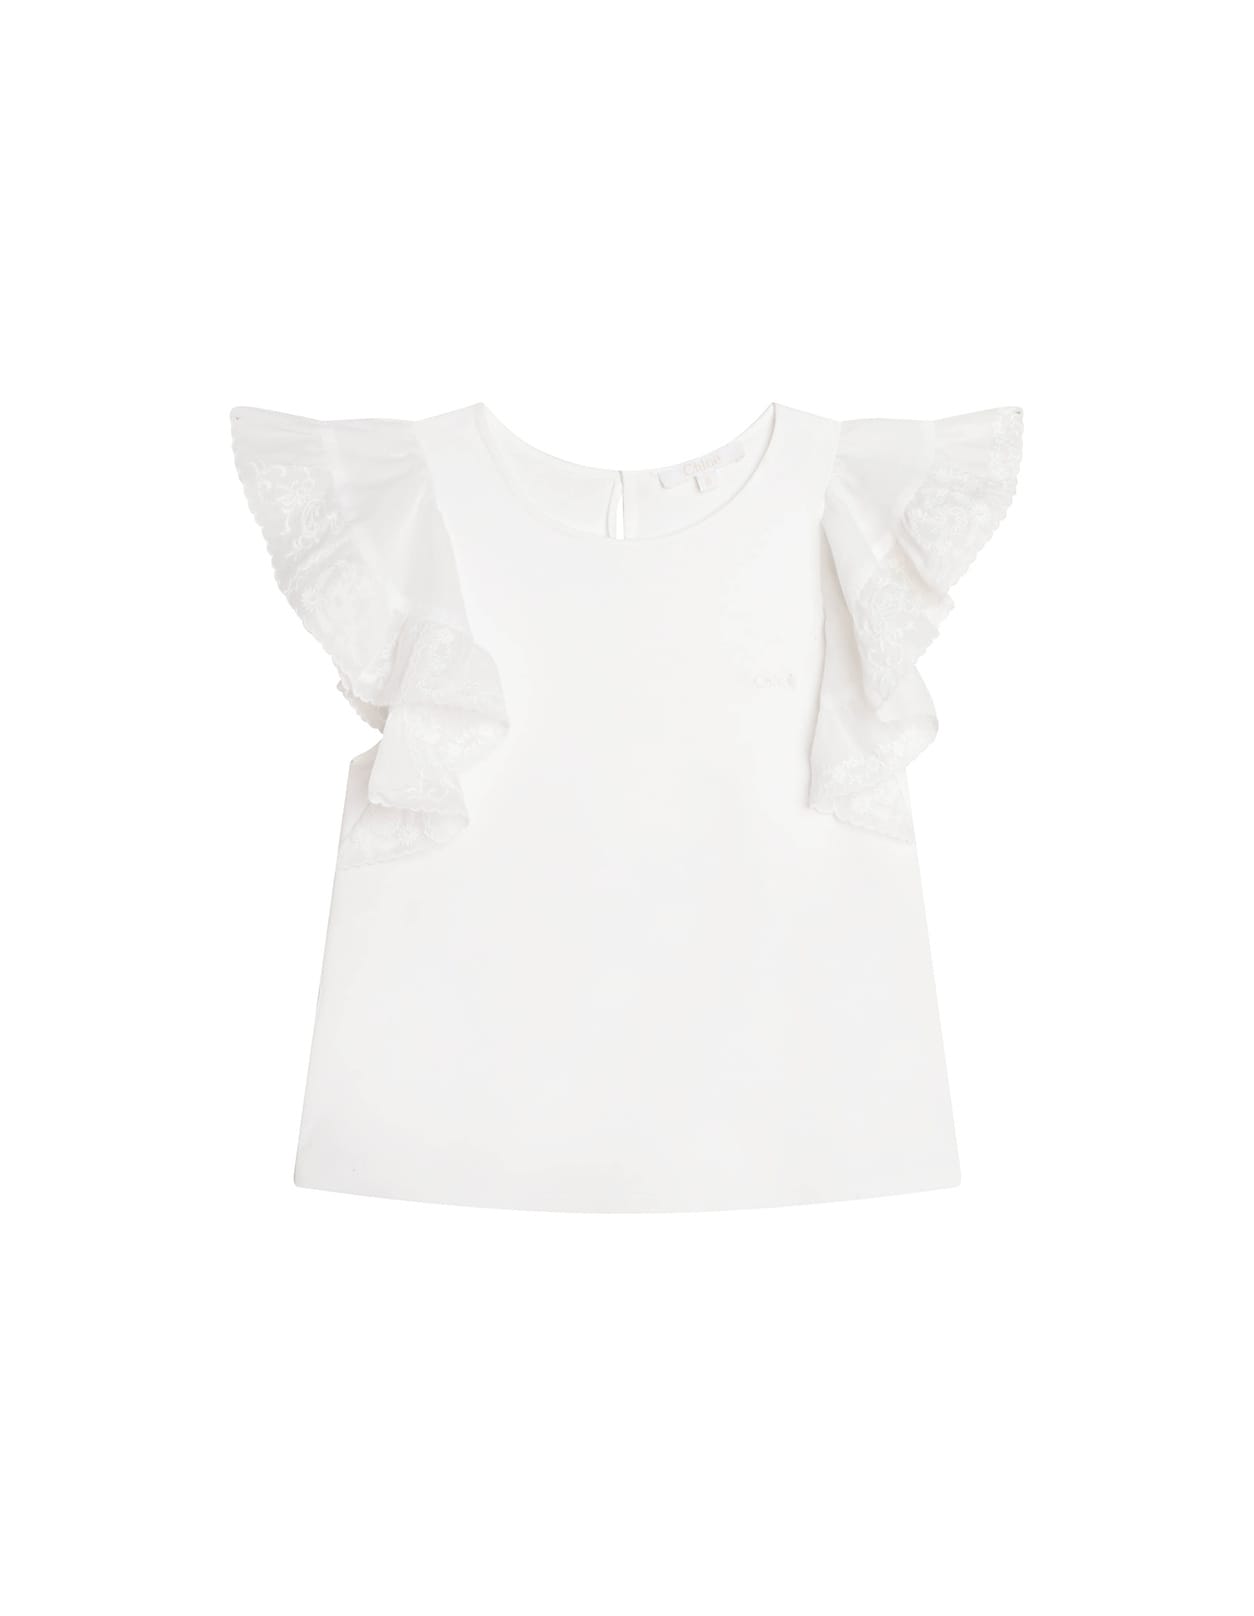 Chloé White Top With Ruffle